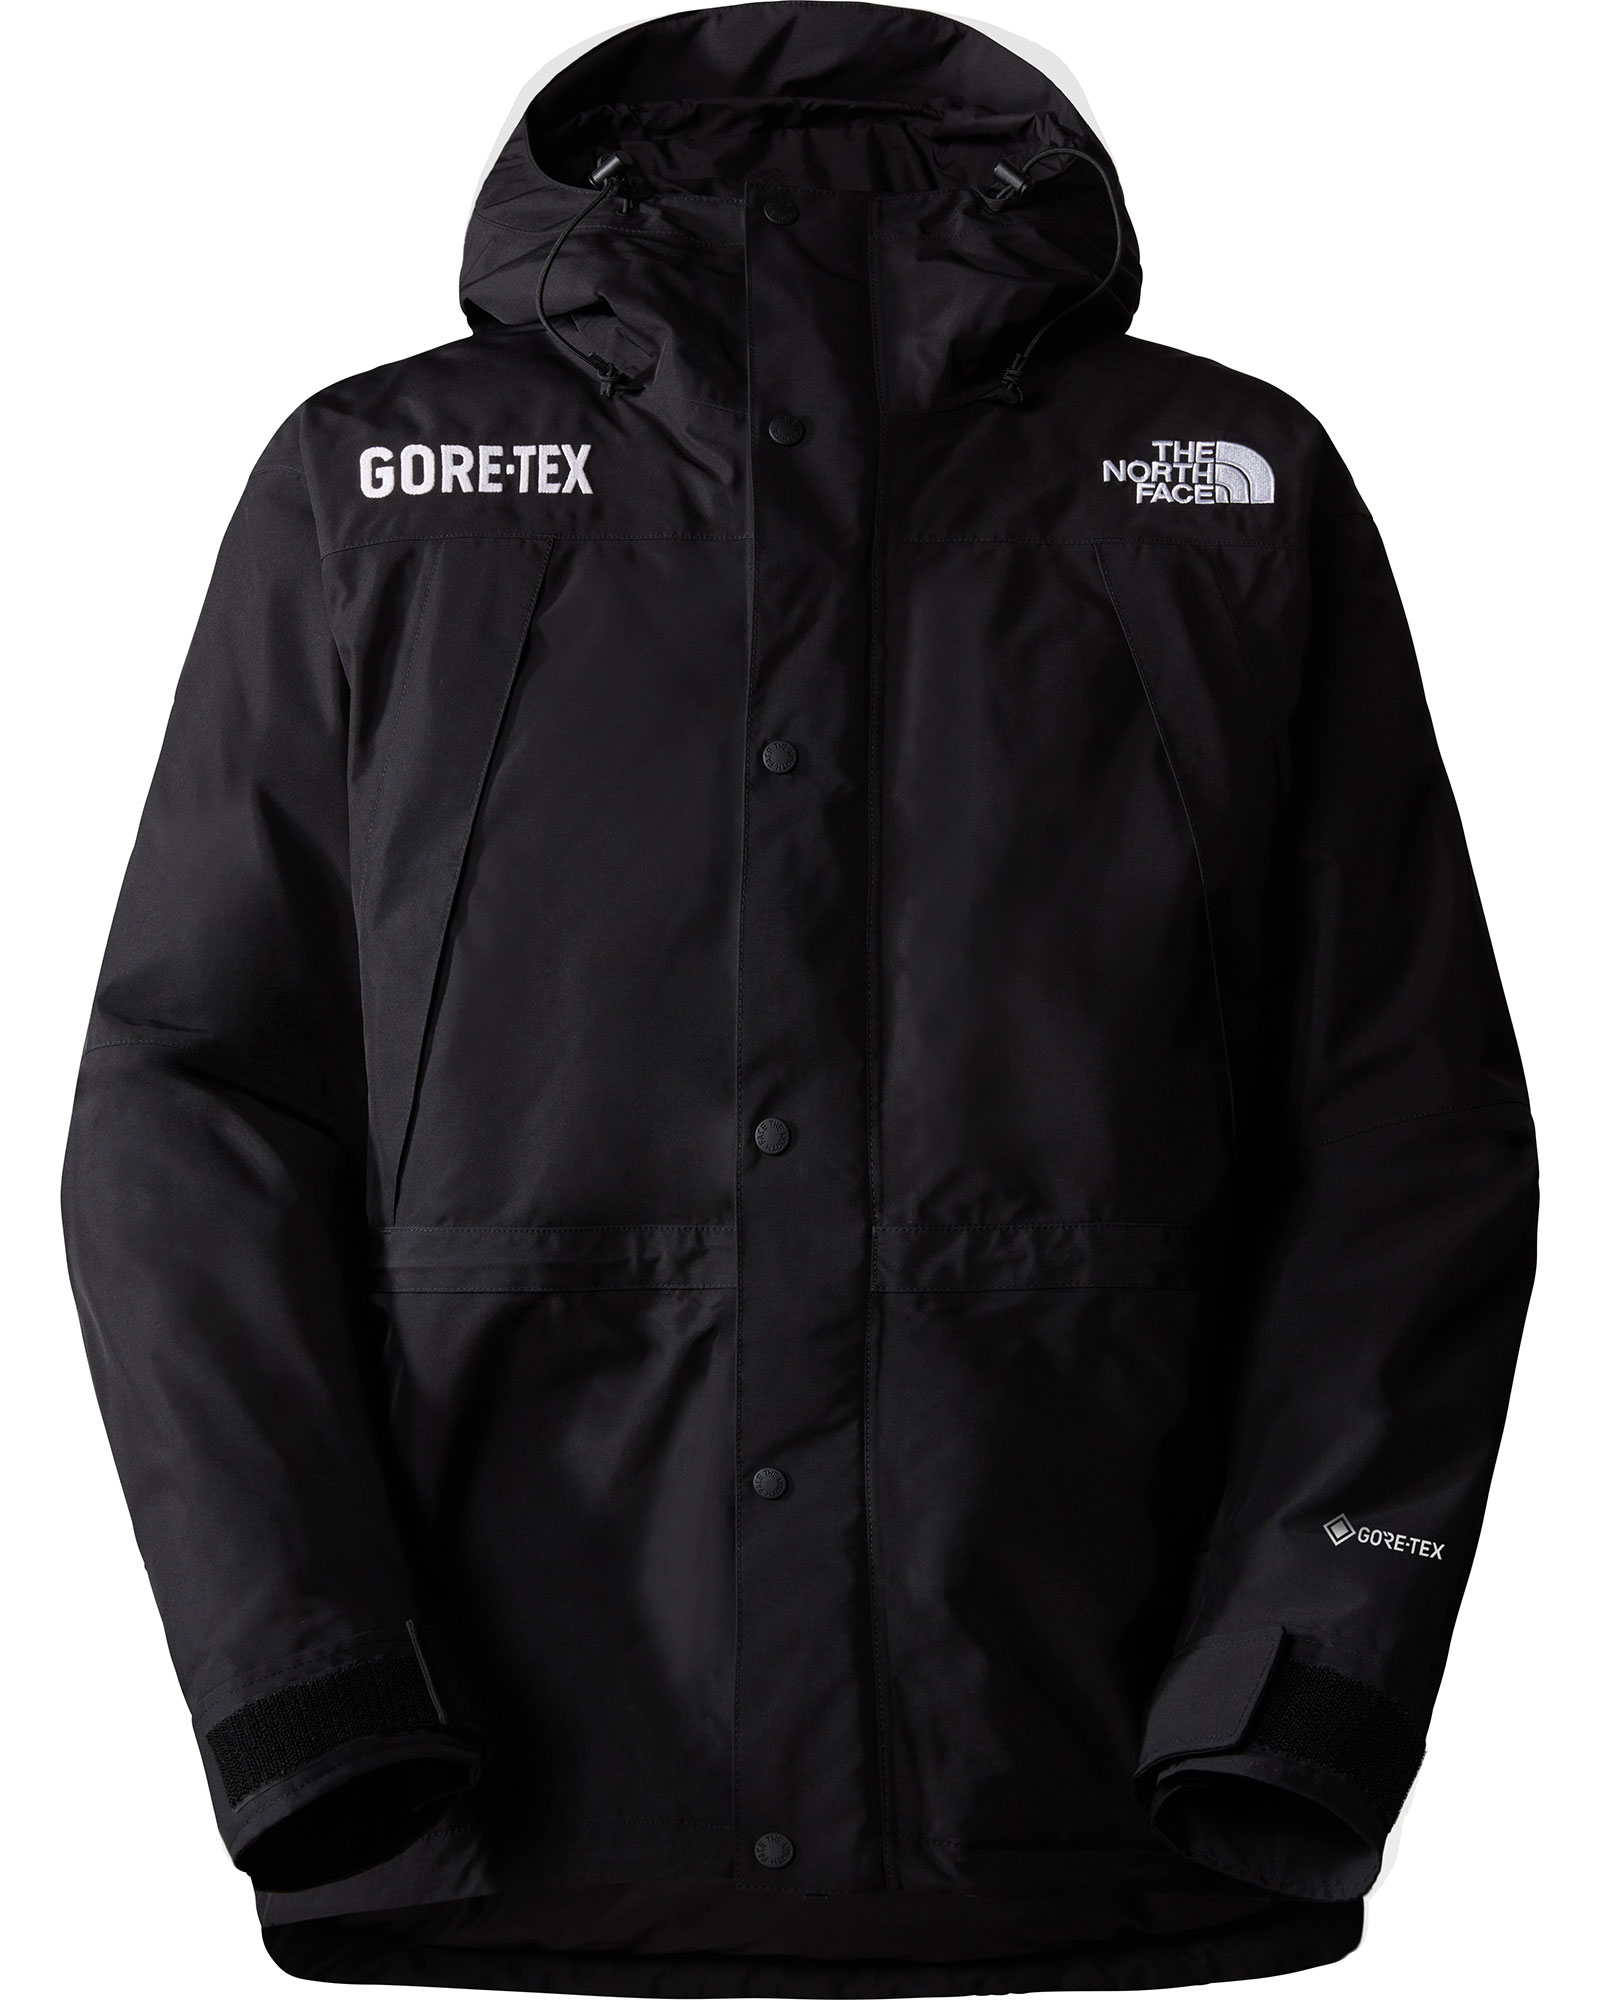 The North Face Men’s Mountain Guide Insulated GORE TEX Jacket - TNF Black S